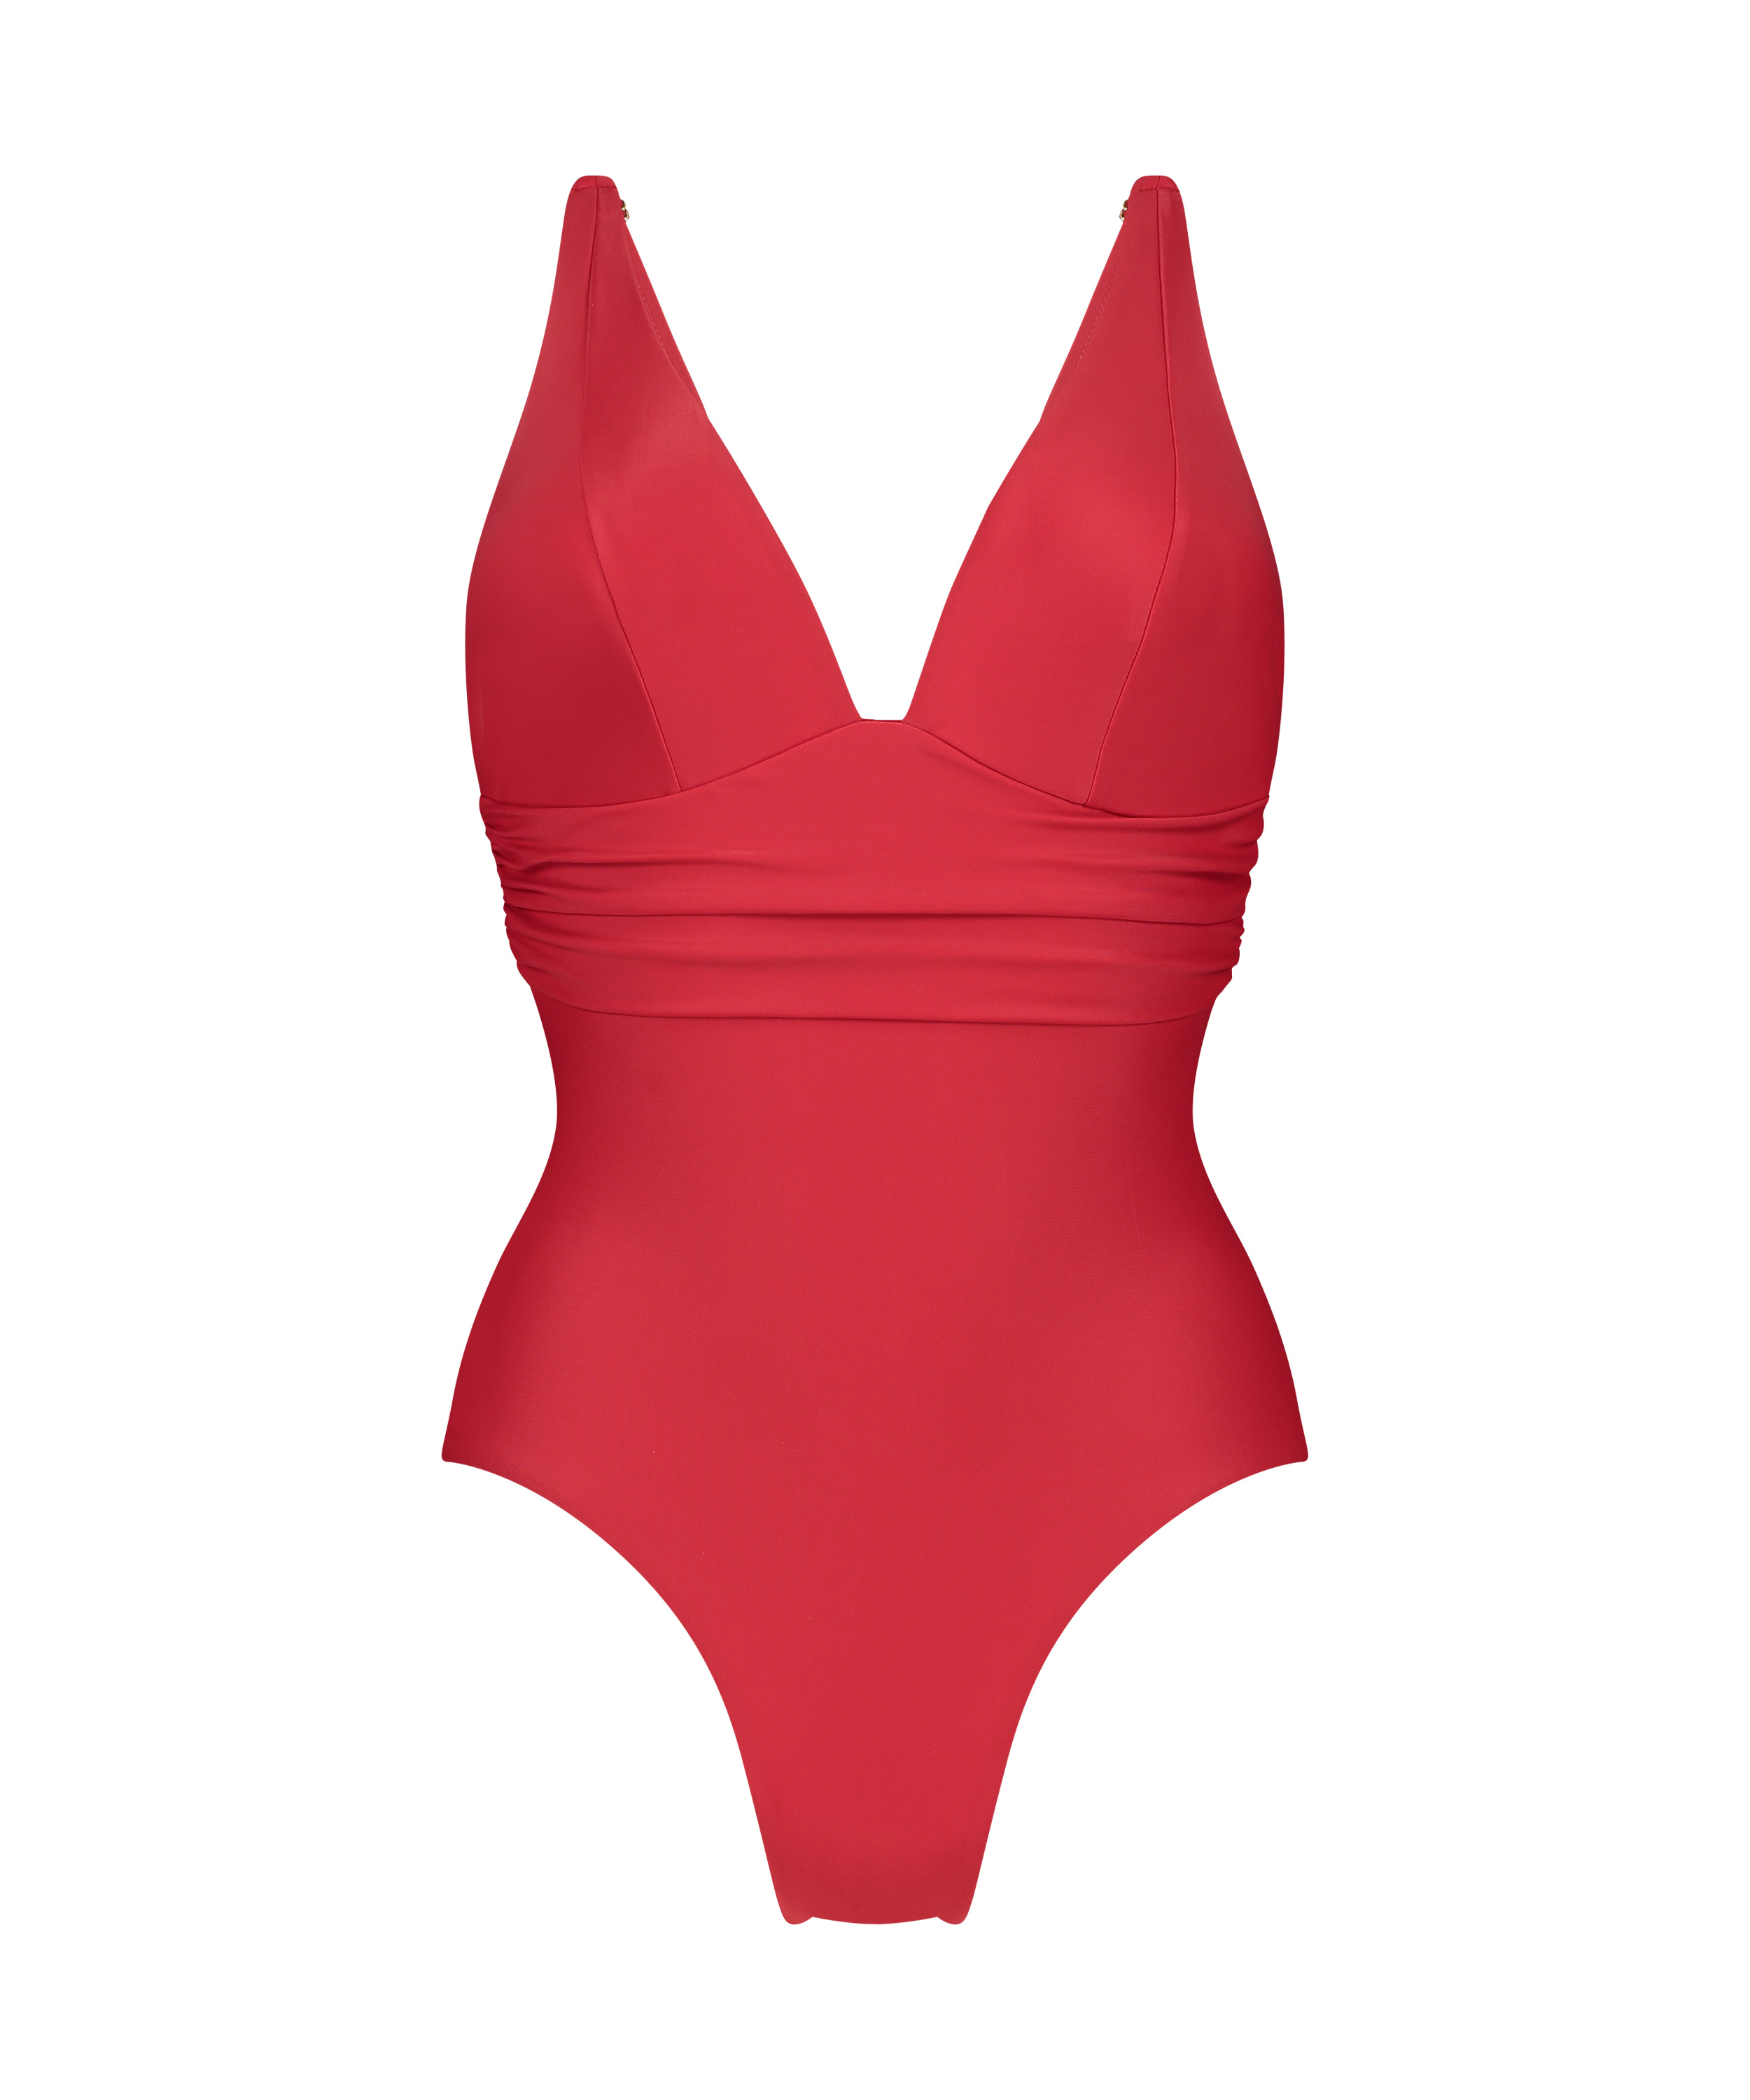 Badpak Shaping Luxe, Rood, main